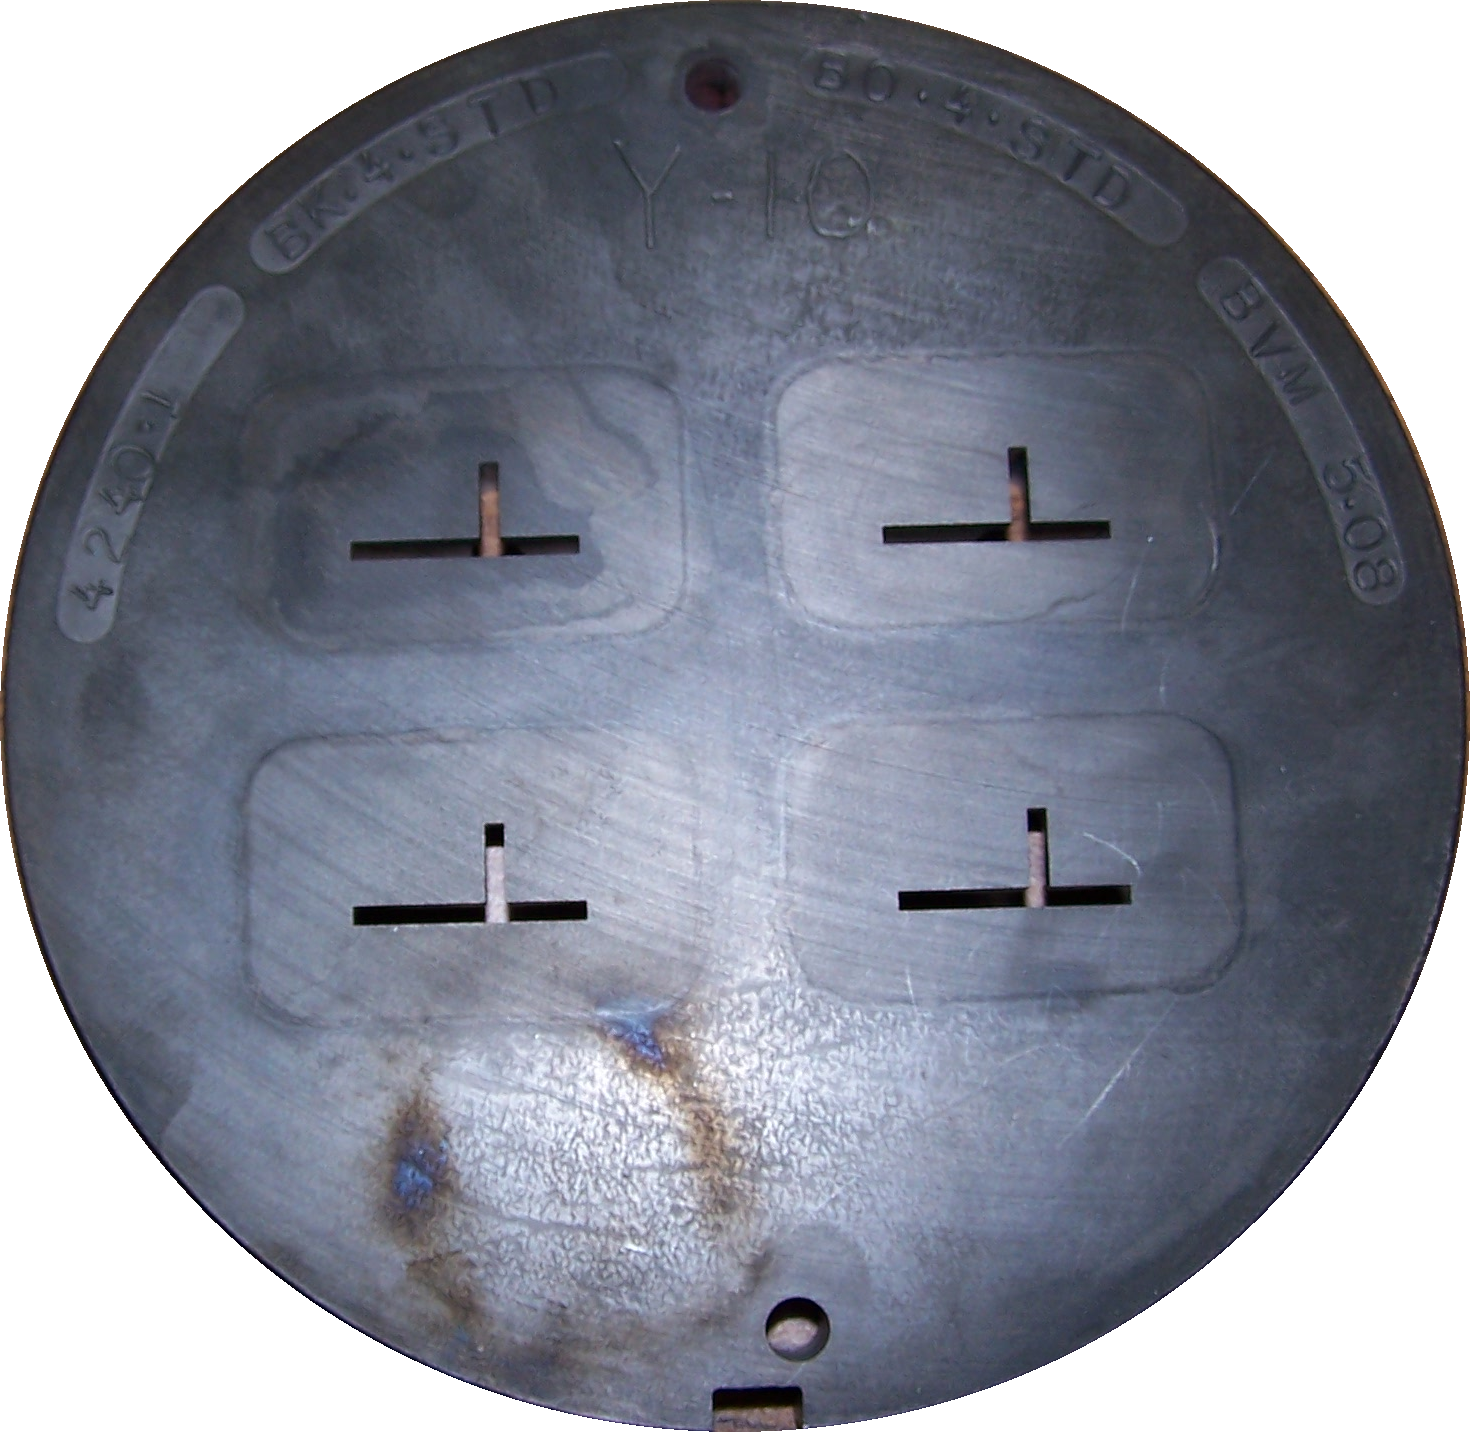 File:Aluminium extrusion die back.png - Wikipedia